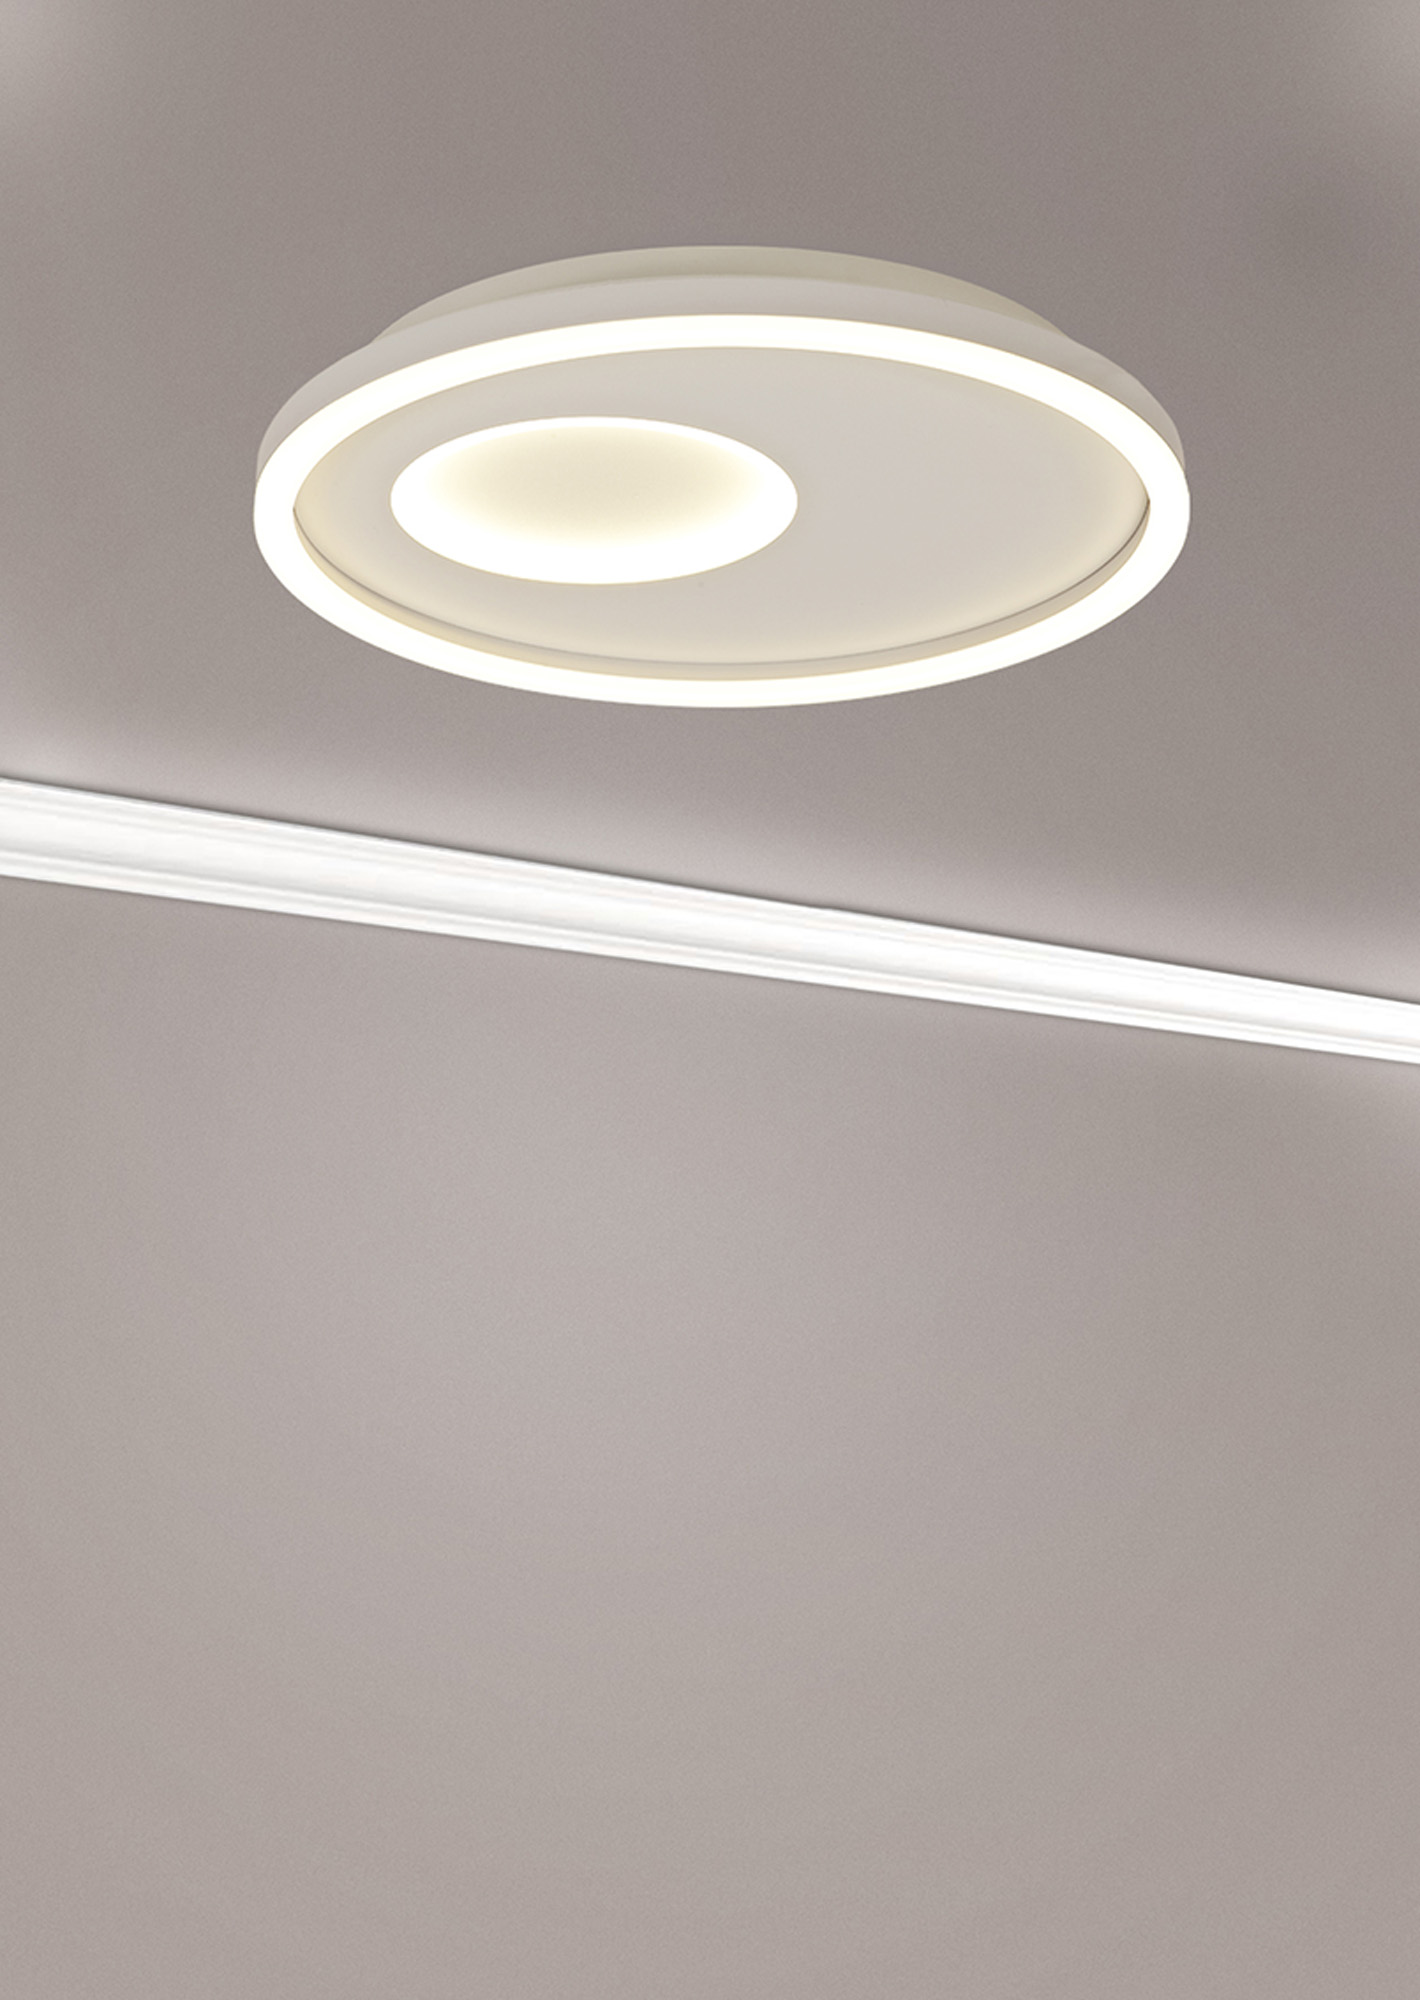 Krater Ceiling Lights Mantra Fusion Flush Fittings